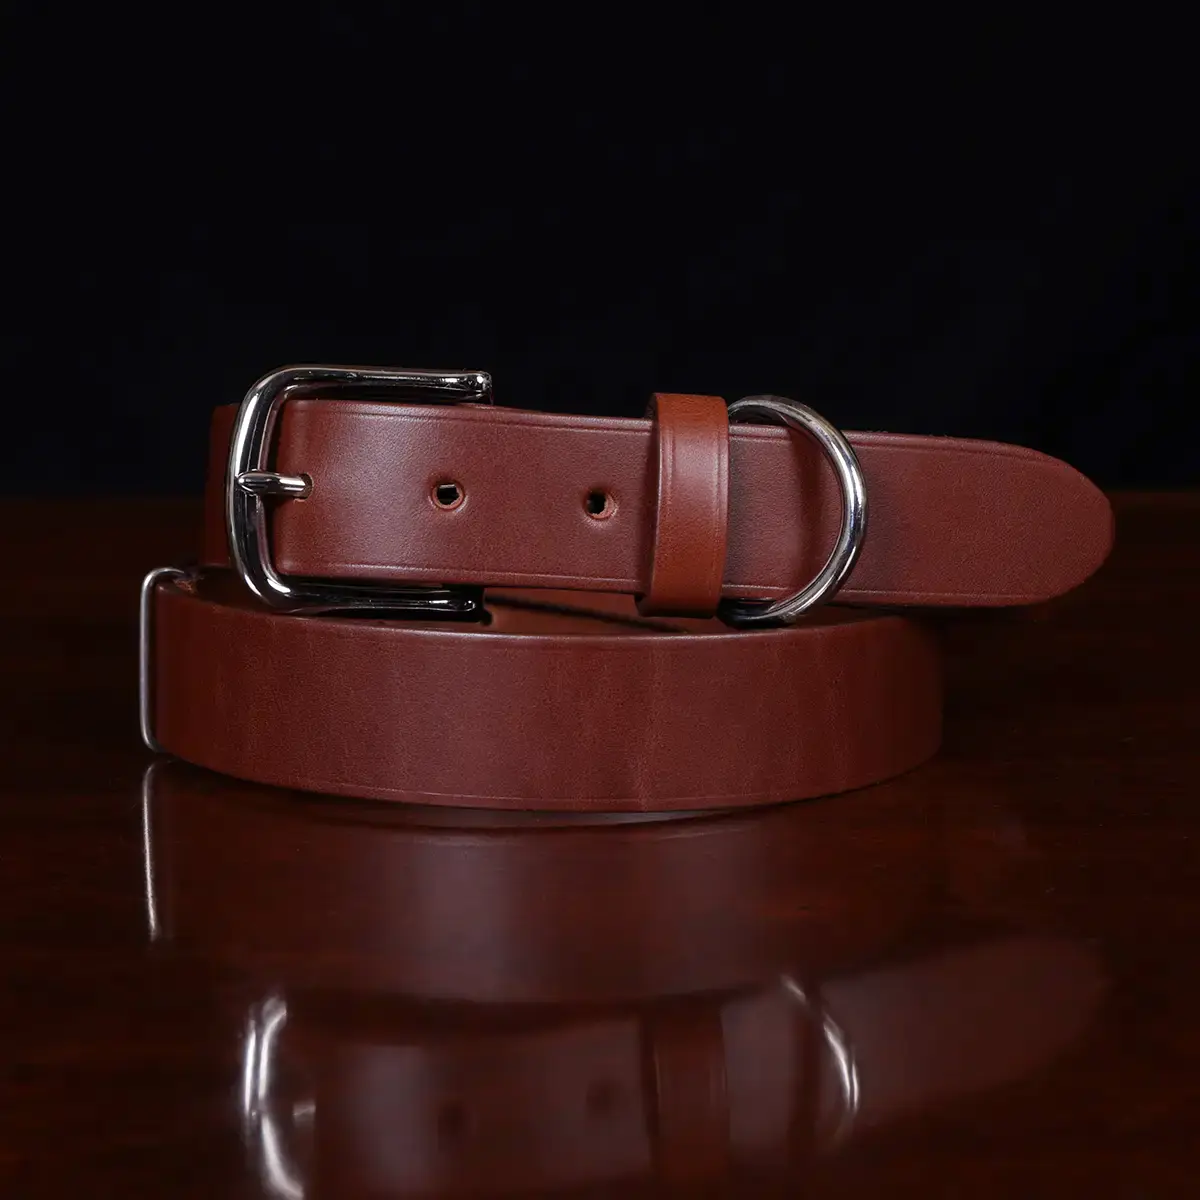 2019 Men And Women Leather Belts Premium Leather Fashion Leather